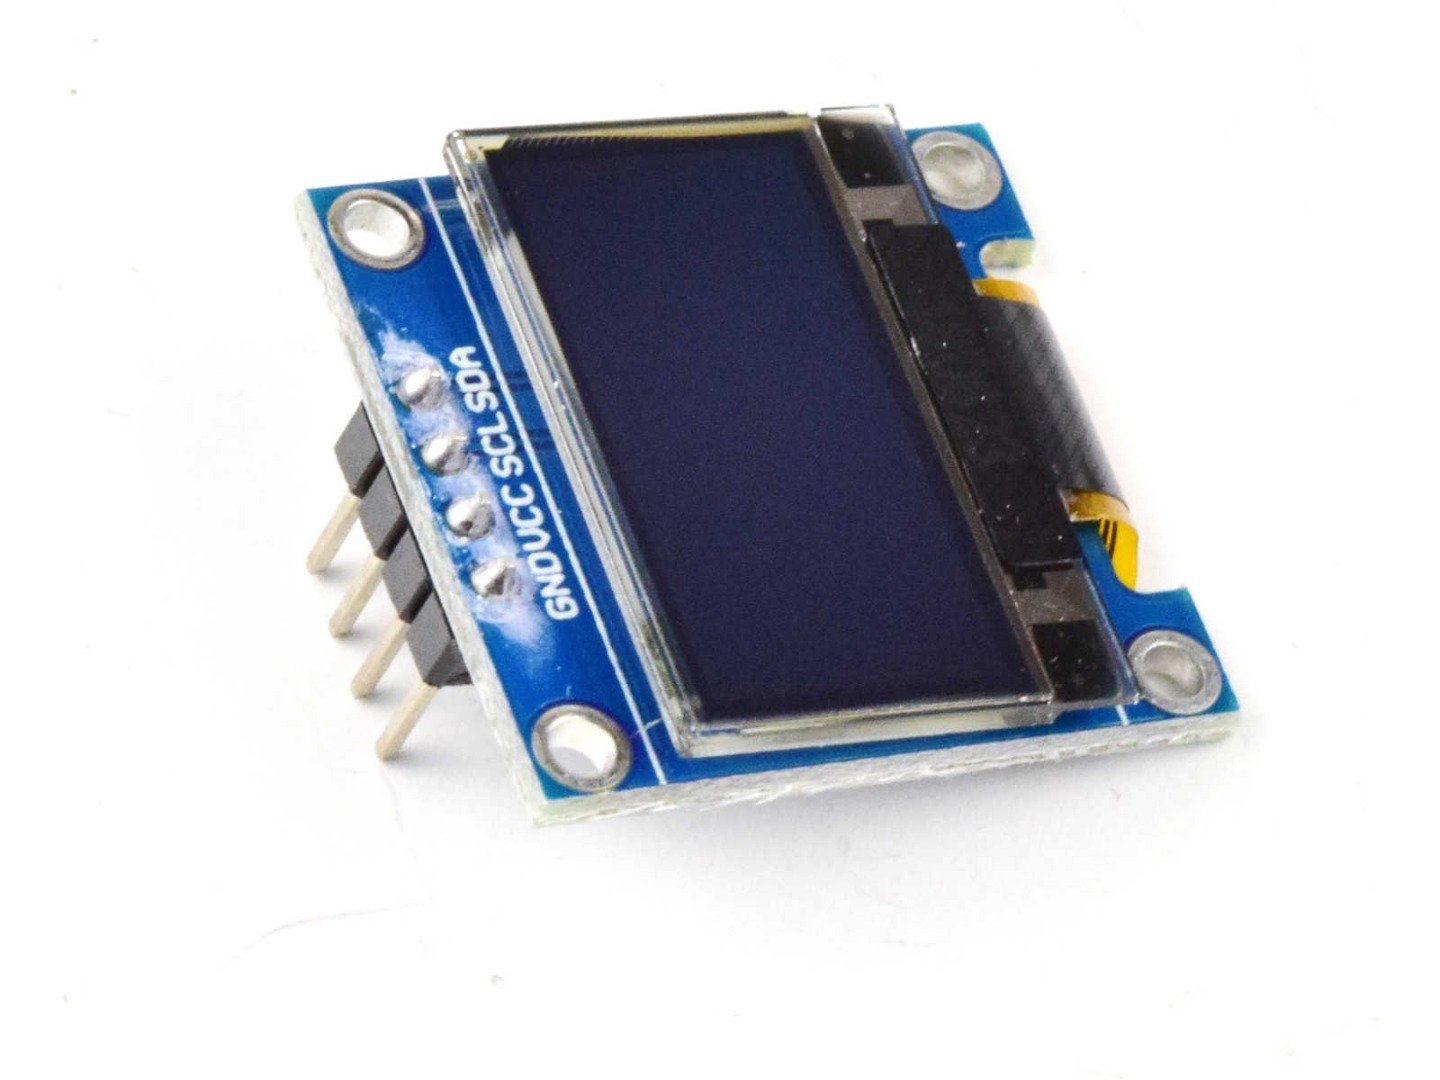 OLED 128×64 Pixel, I2C, 0.96 inch, SSD1306 SH1106, 3-5V (100% compatible with Arduino) 7